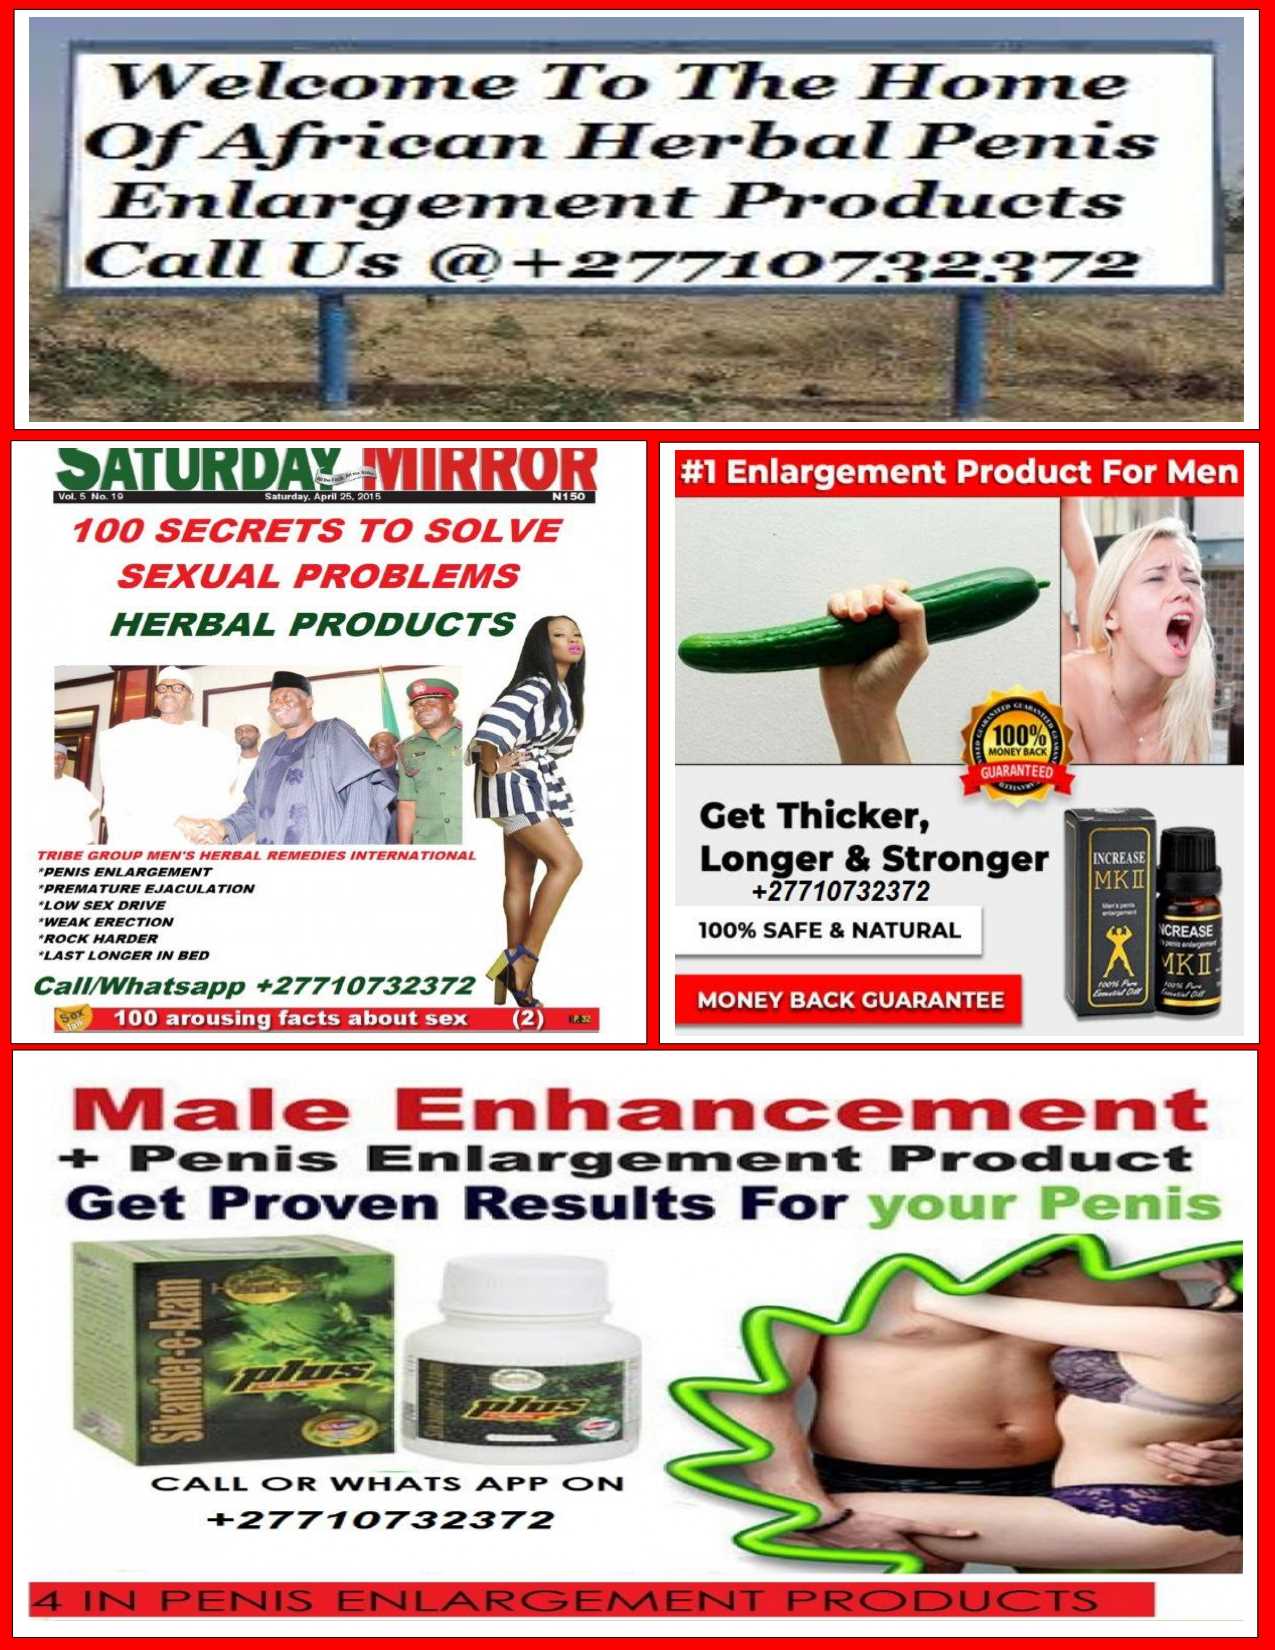 Get A Massive Penis In 1 Week With Herbal Men's Supplements In Cessnock City in Australia And Durban City South Africa Call ✆ +27710732372 Buy Penis Enlargement Products In Doha City In Qatar And Munduk Town In Bali, Indonesia